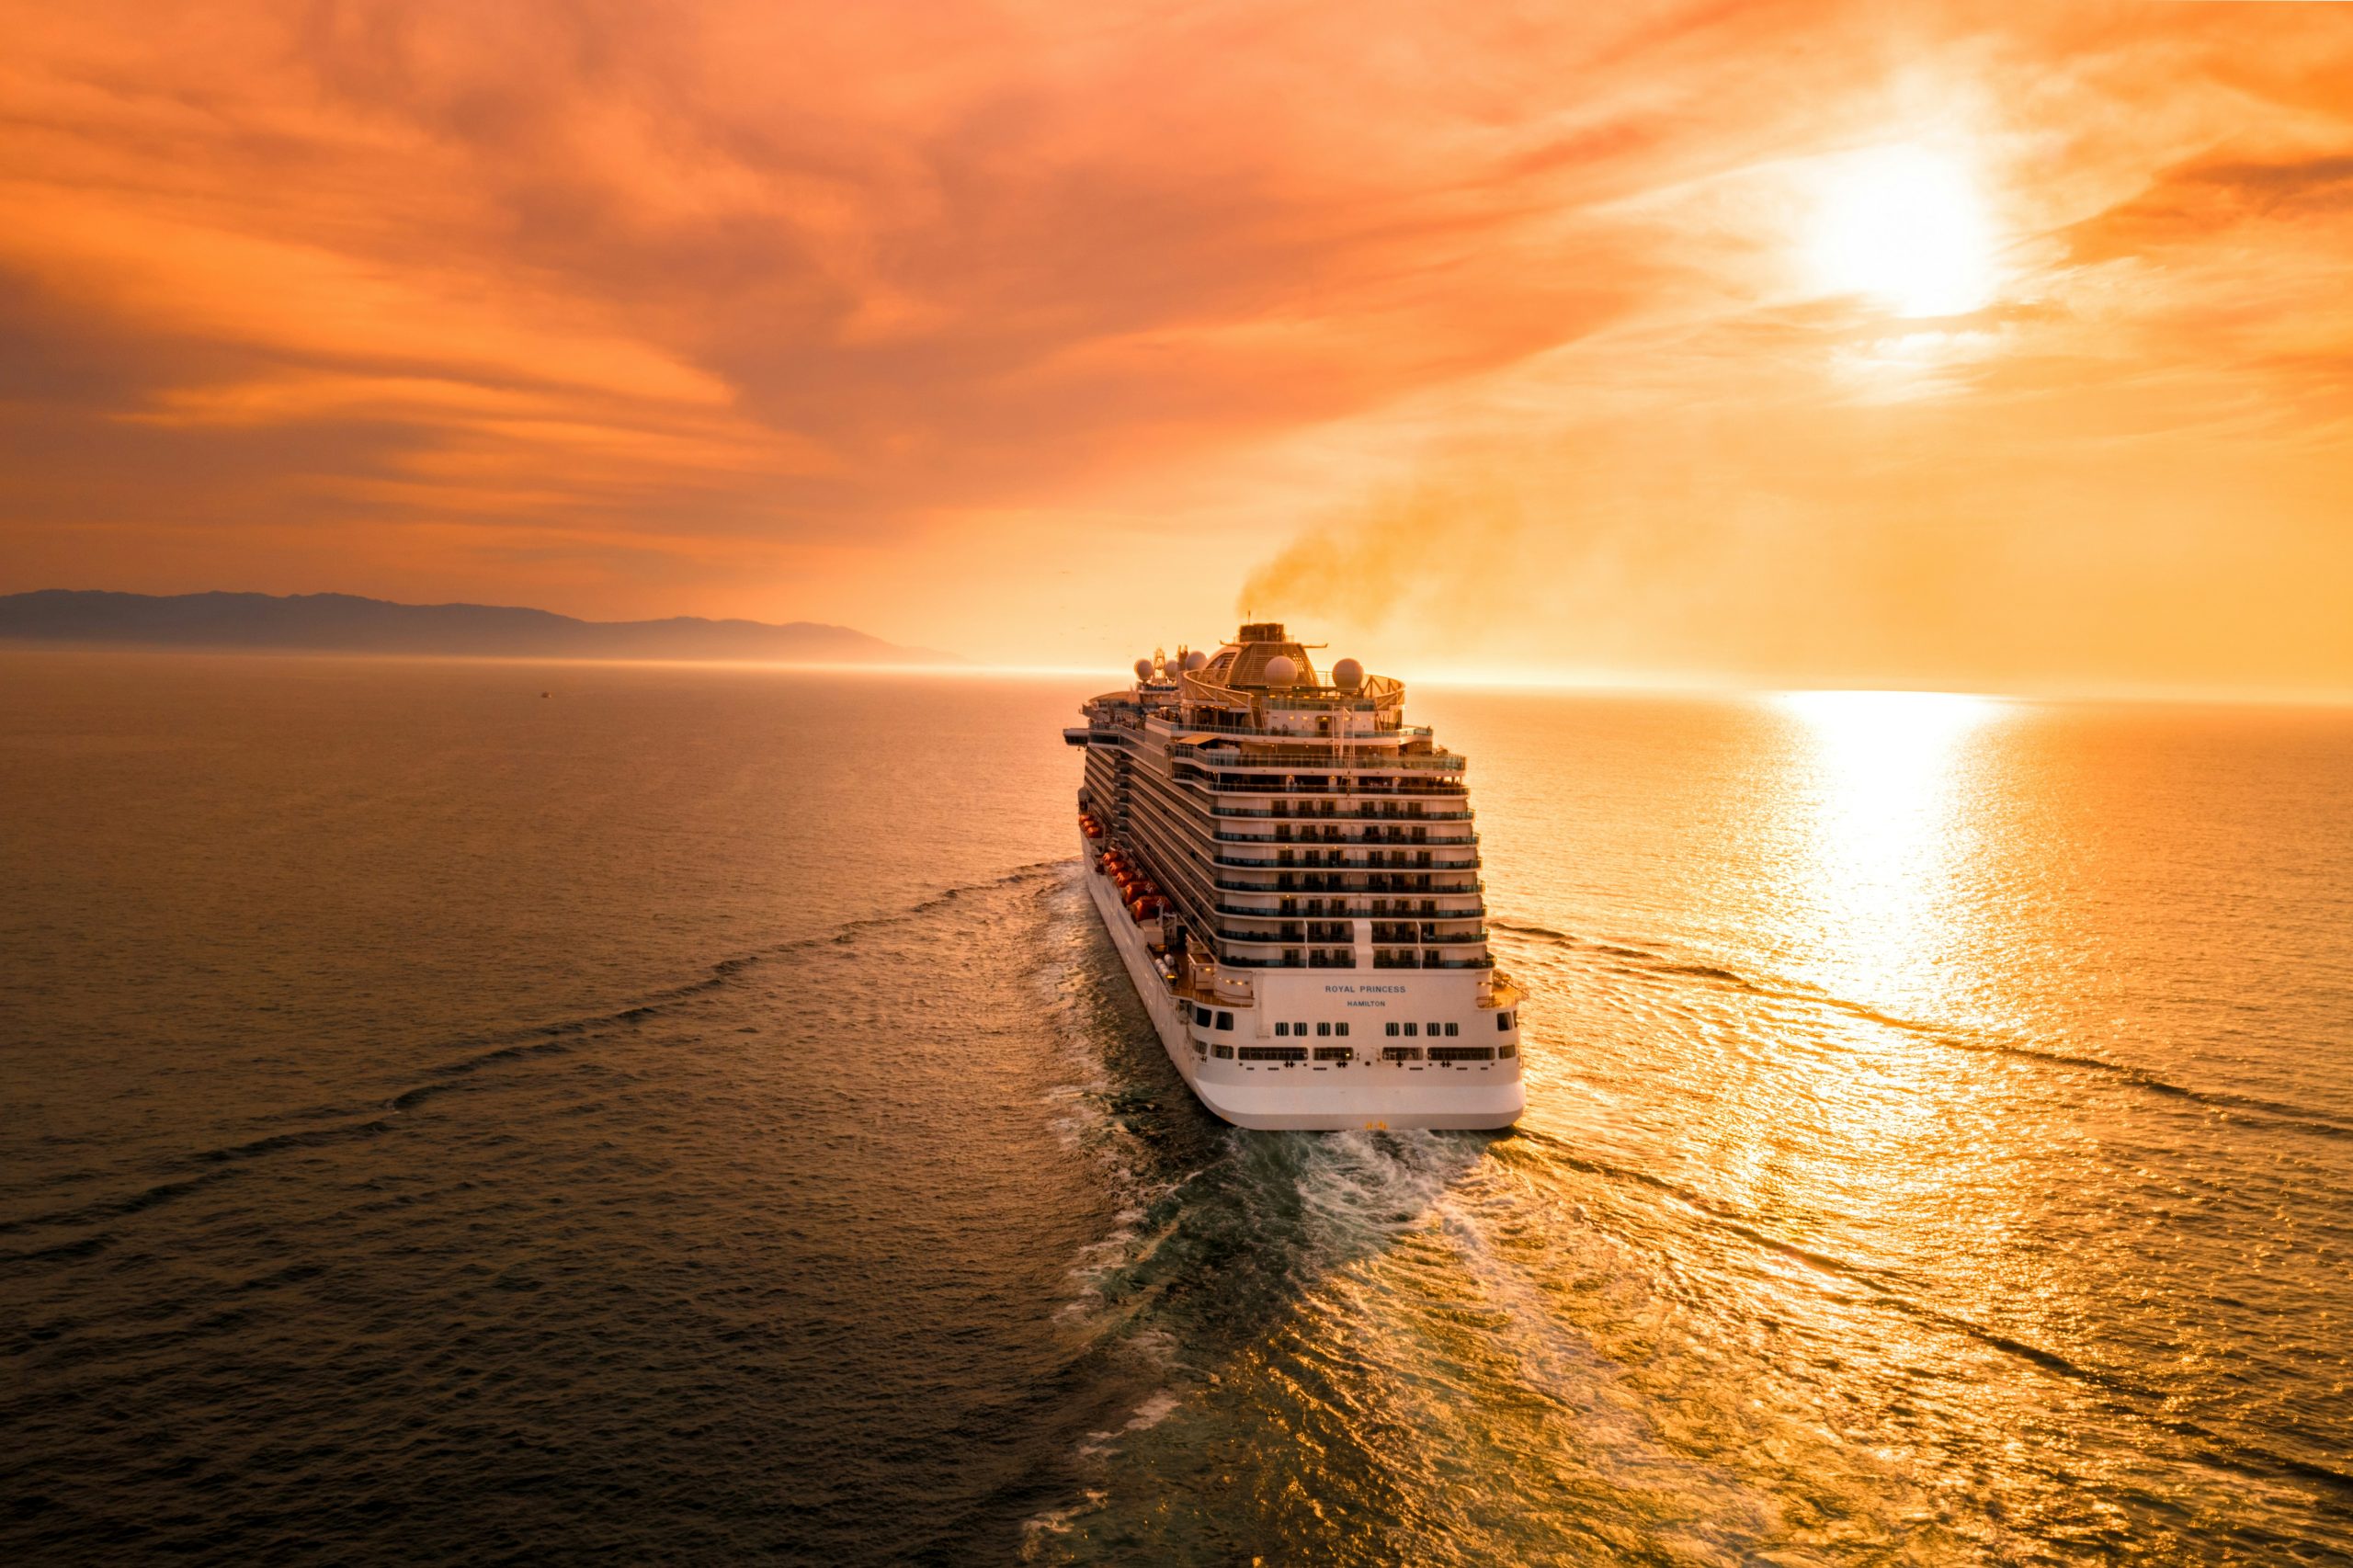 discover useful and valuable cruise tips to enhance your cruise vacation experience. learn about packing tips, on-board activities, shore excursions, and more.